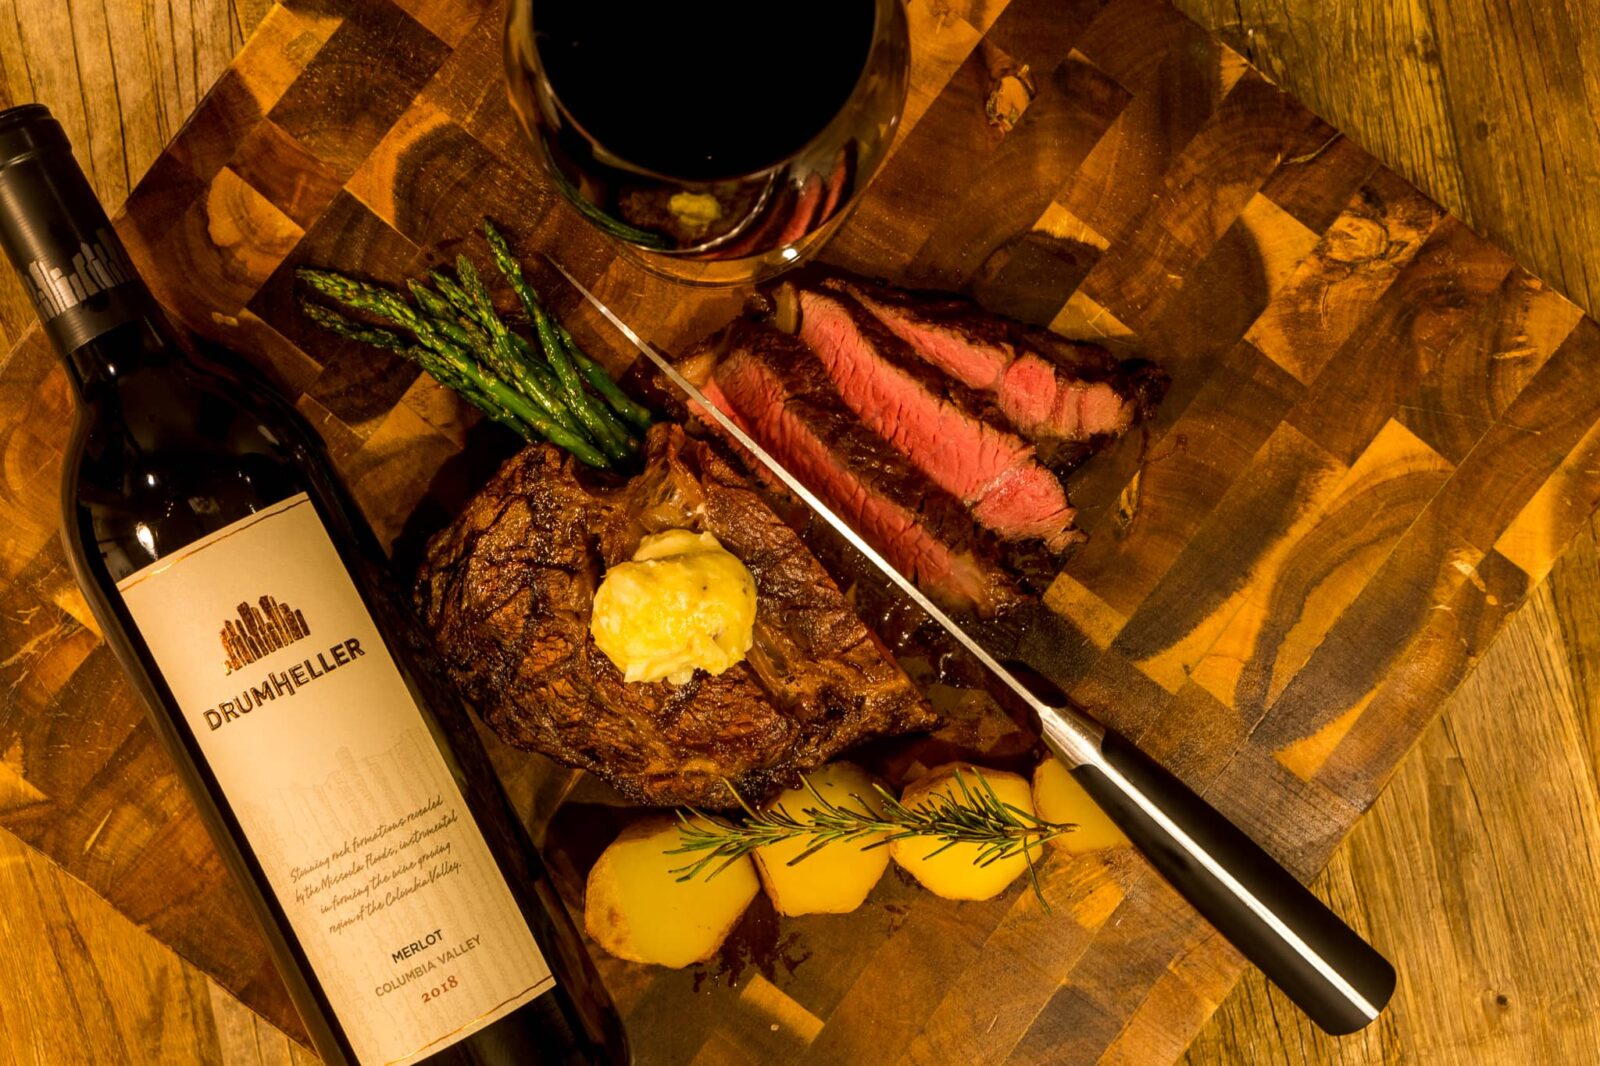 A delicious steak served with roasted rosemary potatoes and a glass of Drumheller's Merlot wine in Drumheller's Food and Drink in Richland, Washington.